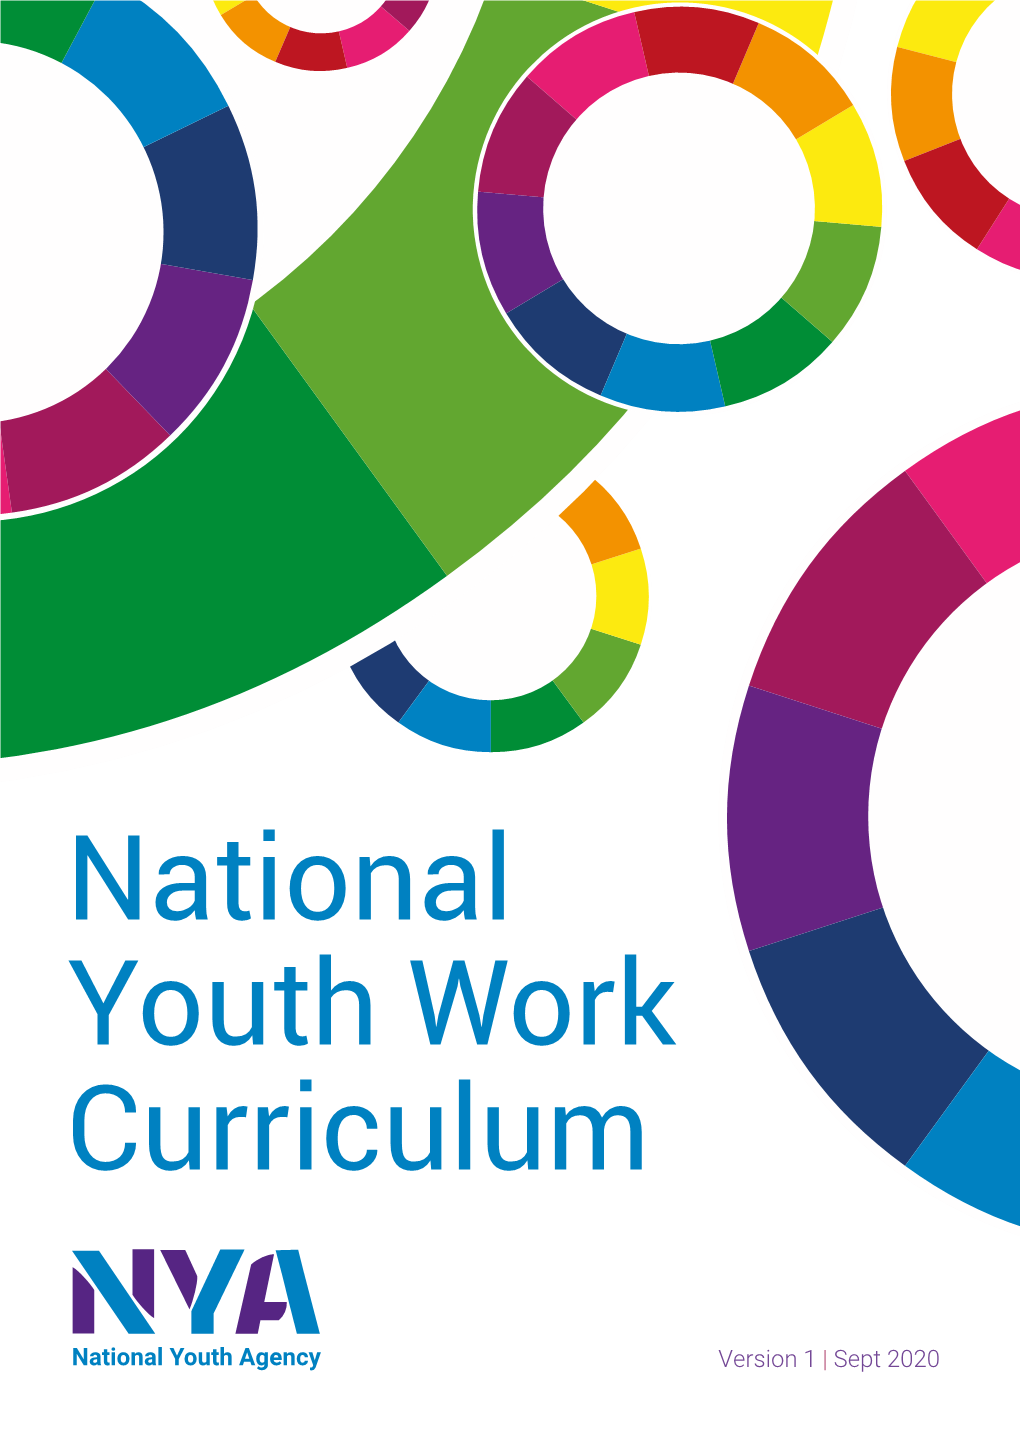 National Youth Work Curriculum